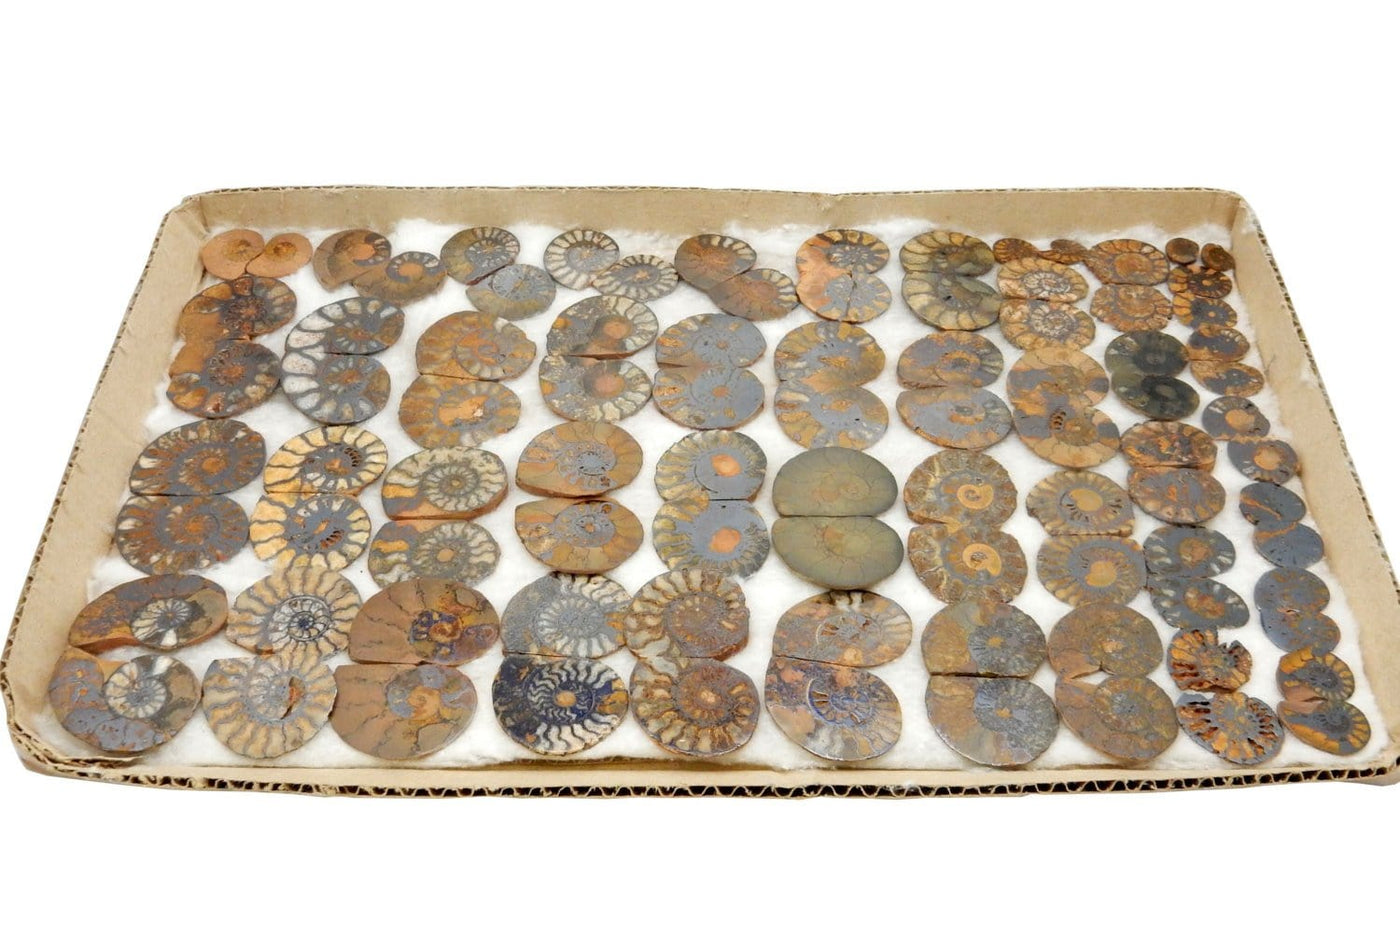 Various Hematite Ammonite Fossil Pairs laid out on a cardboard surface.